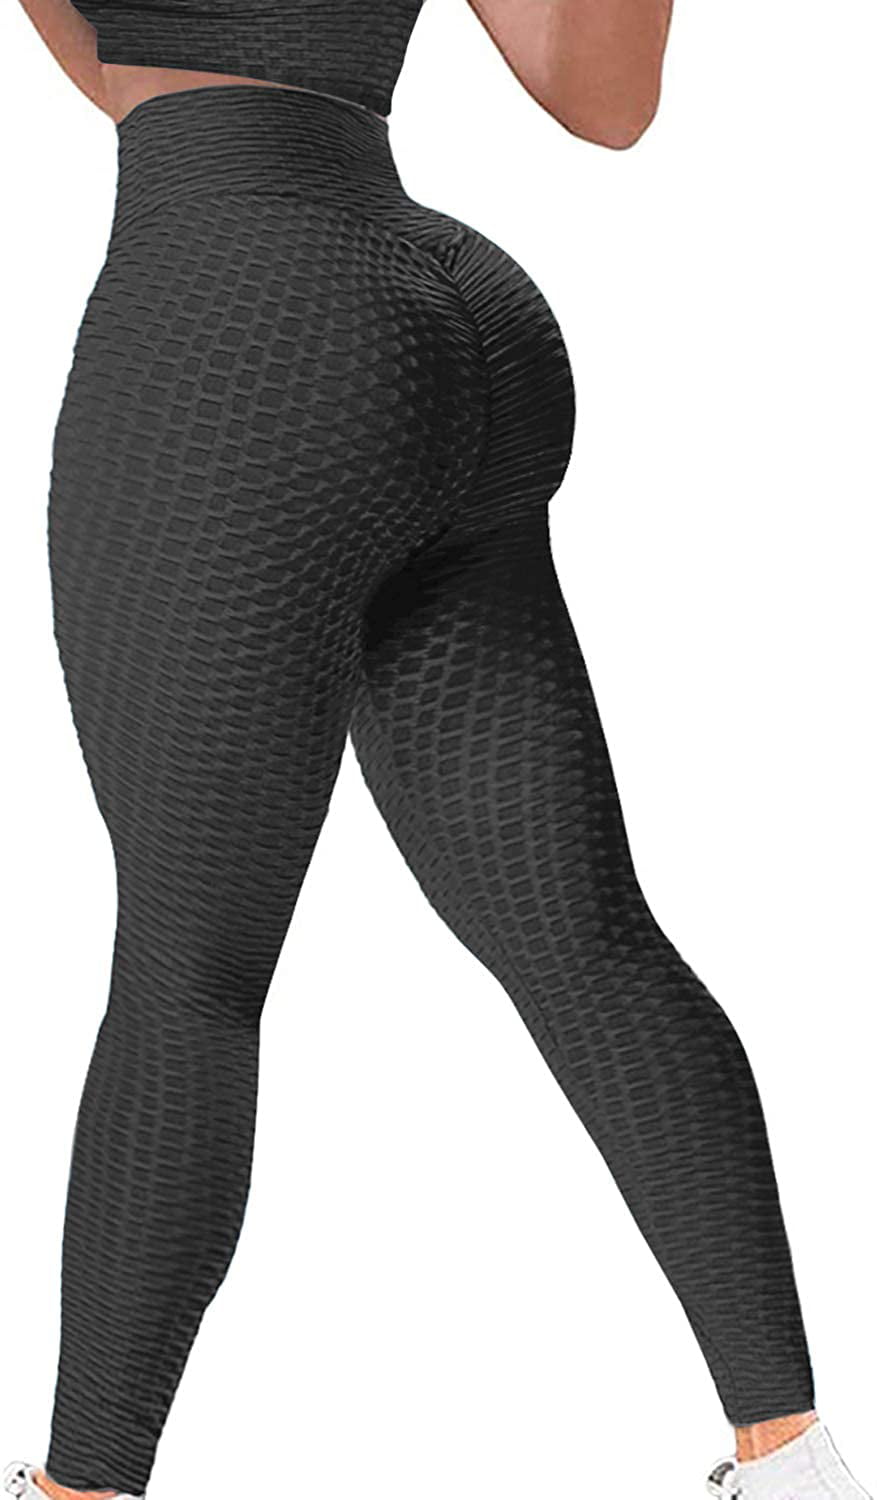 Letsfit Size Large Anti-Cellulite Leggings Ruched Workout, Yoga